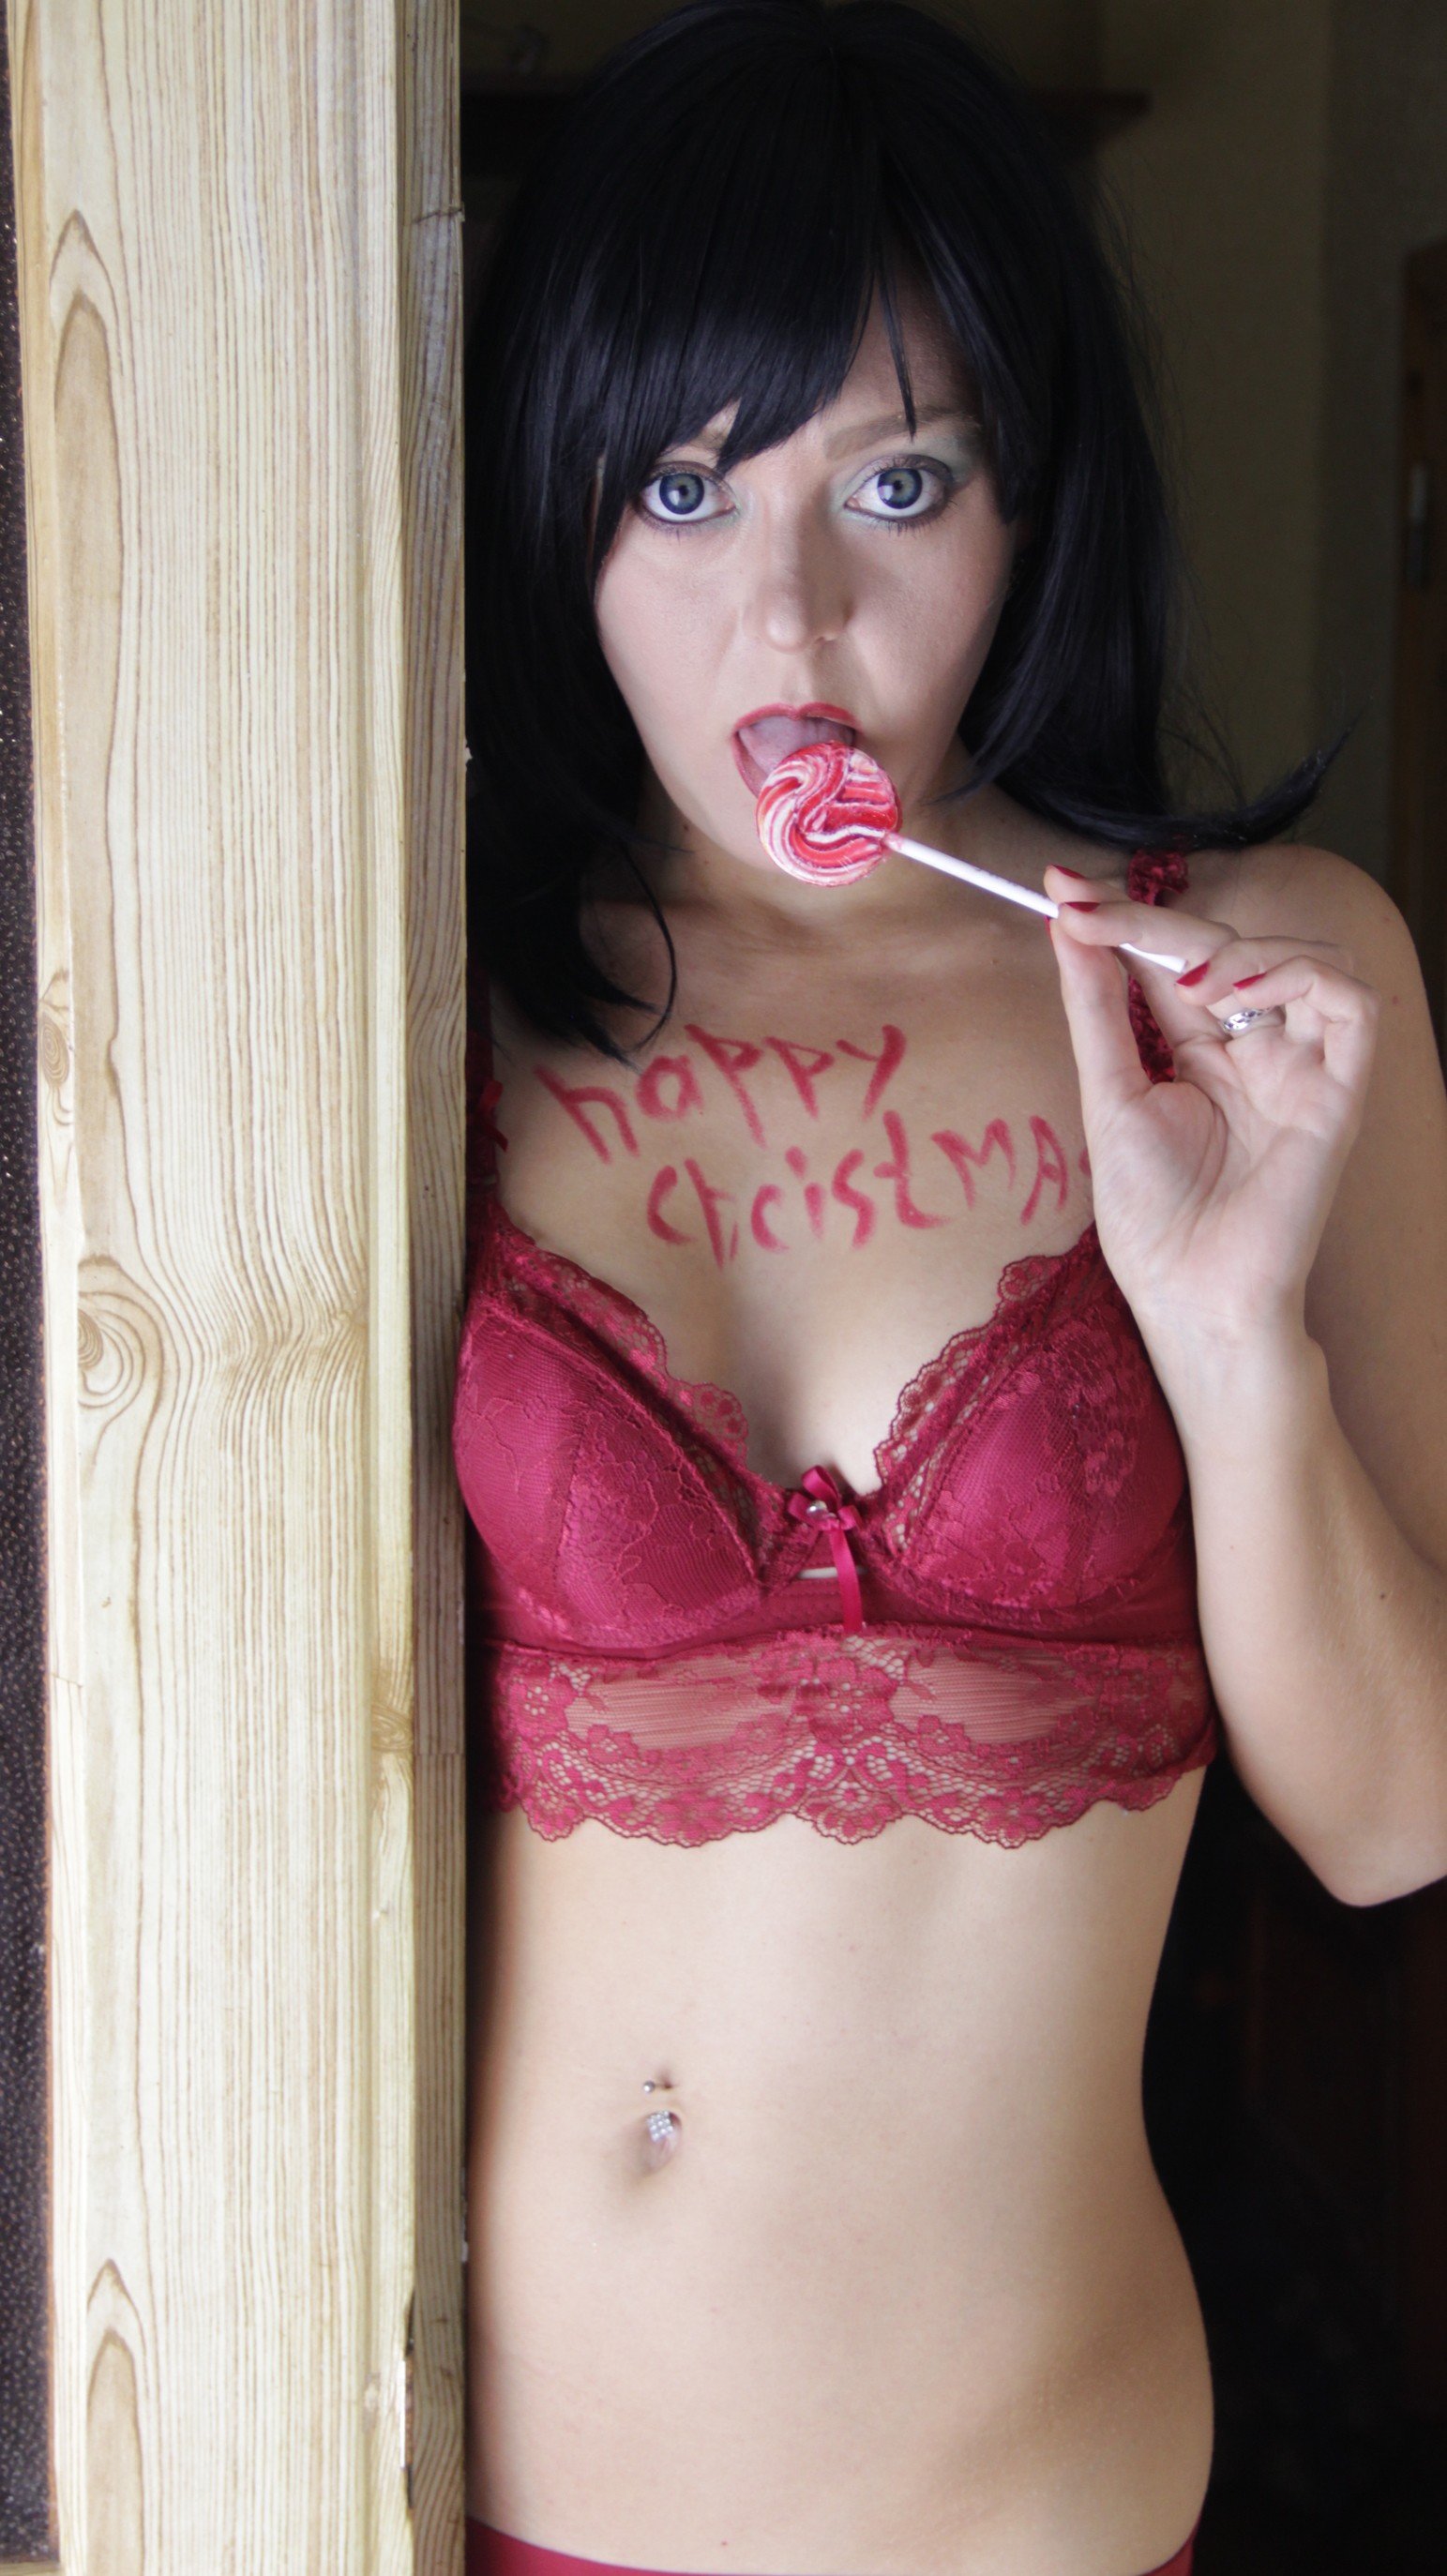 Photo by HomeGrownVideo with the username @HomeGrownVideo, who is a brand user,  December 21, 2019 at 10:20 PM and the text says 'Happy christmas to all ;) #merrychristmas #sexygirl #naughty #redlingerie #lollipop #lickinglollipop #brunette #brunettegirl #holidaycheer Enjoy more at www.homegrownvideo.com'